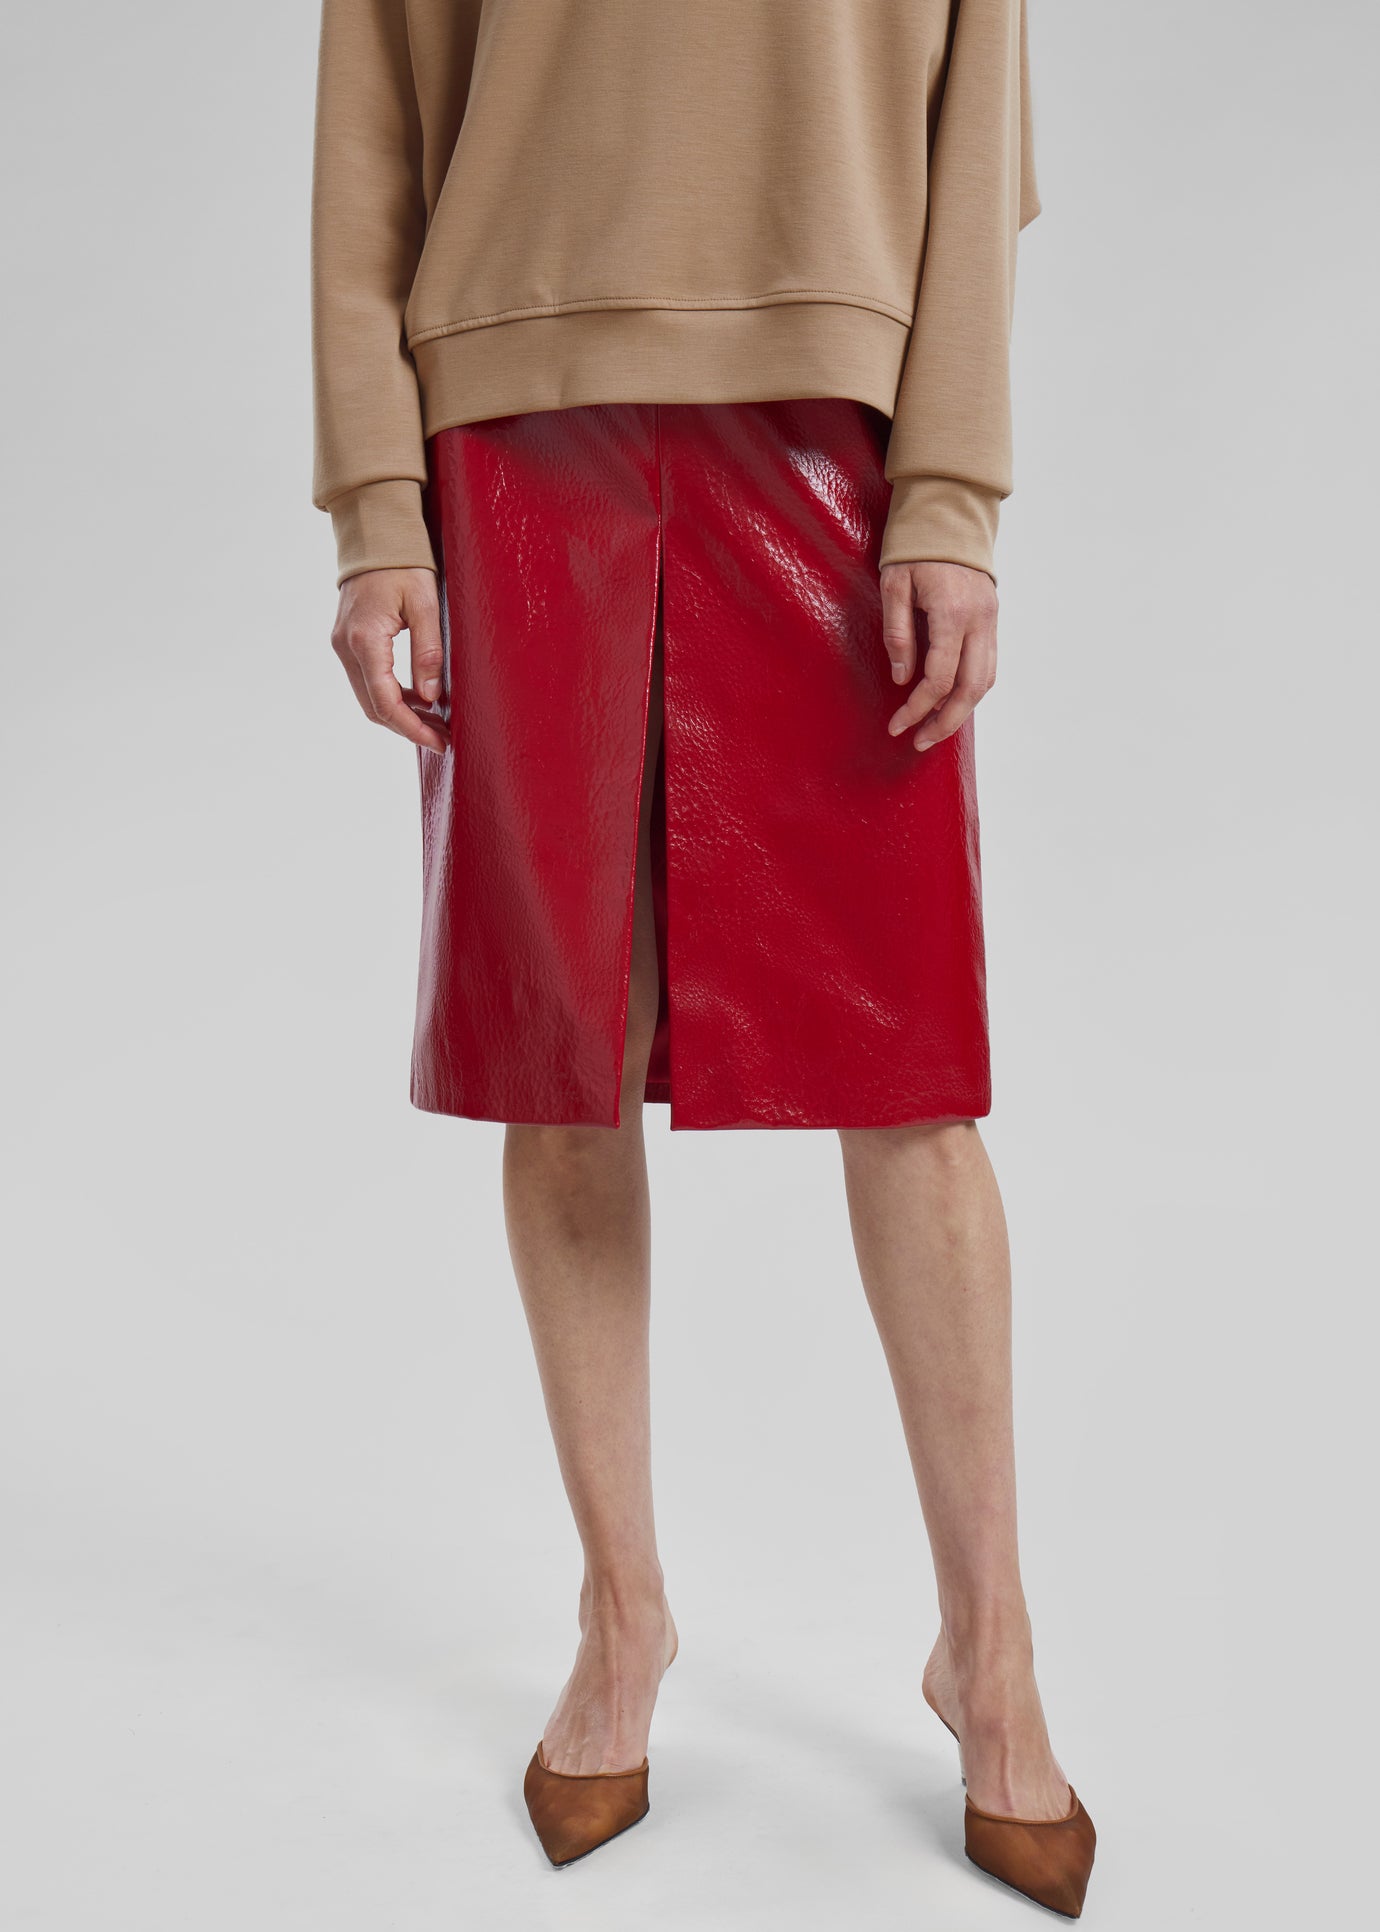 Britt Crackled Faux Leather Midi Skirt - Red - 1